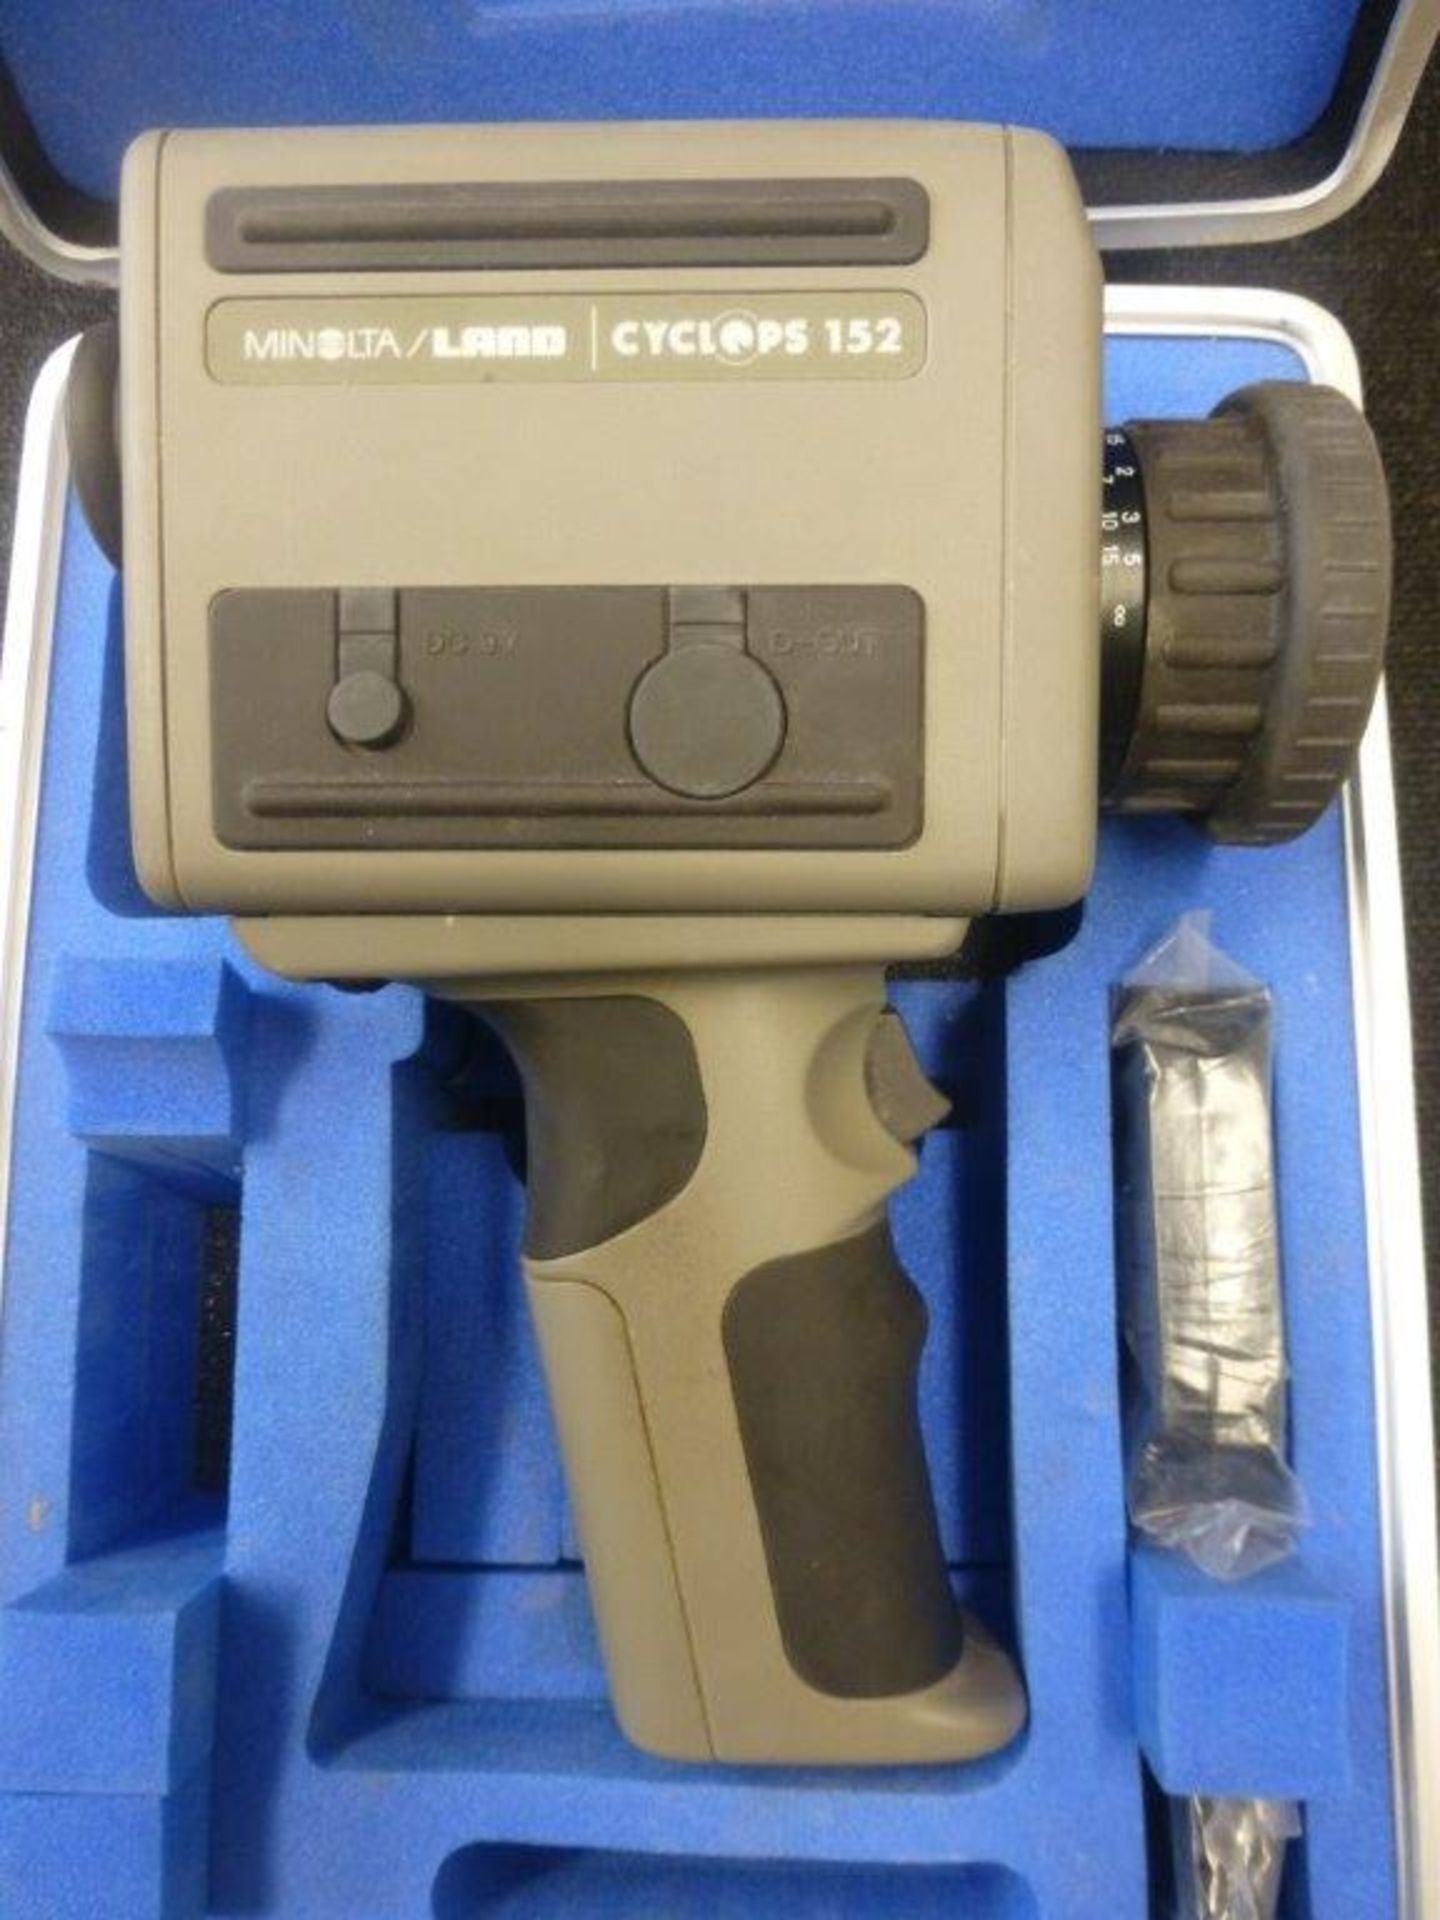 Minolta Land Cyclops 152 hand held infra red thermometer with storage case - Image 3 of 4